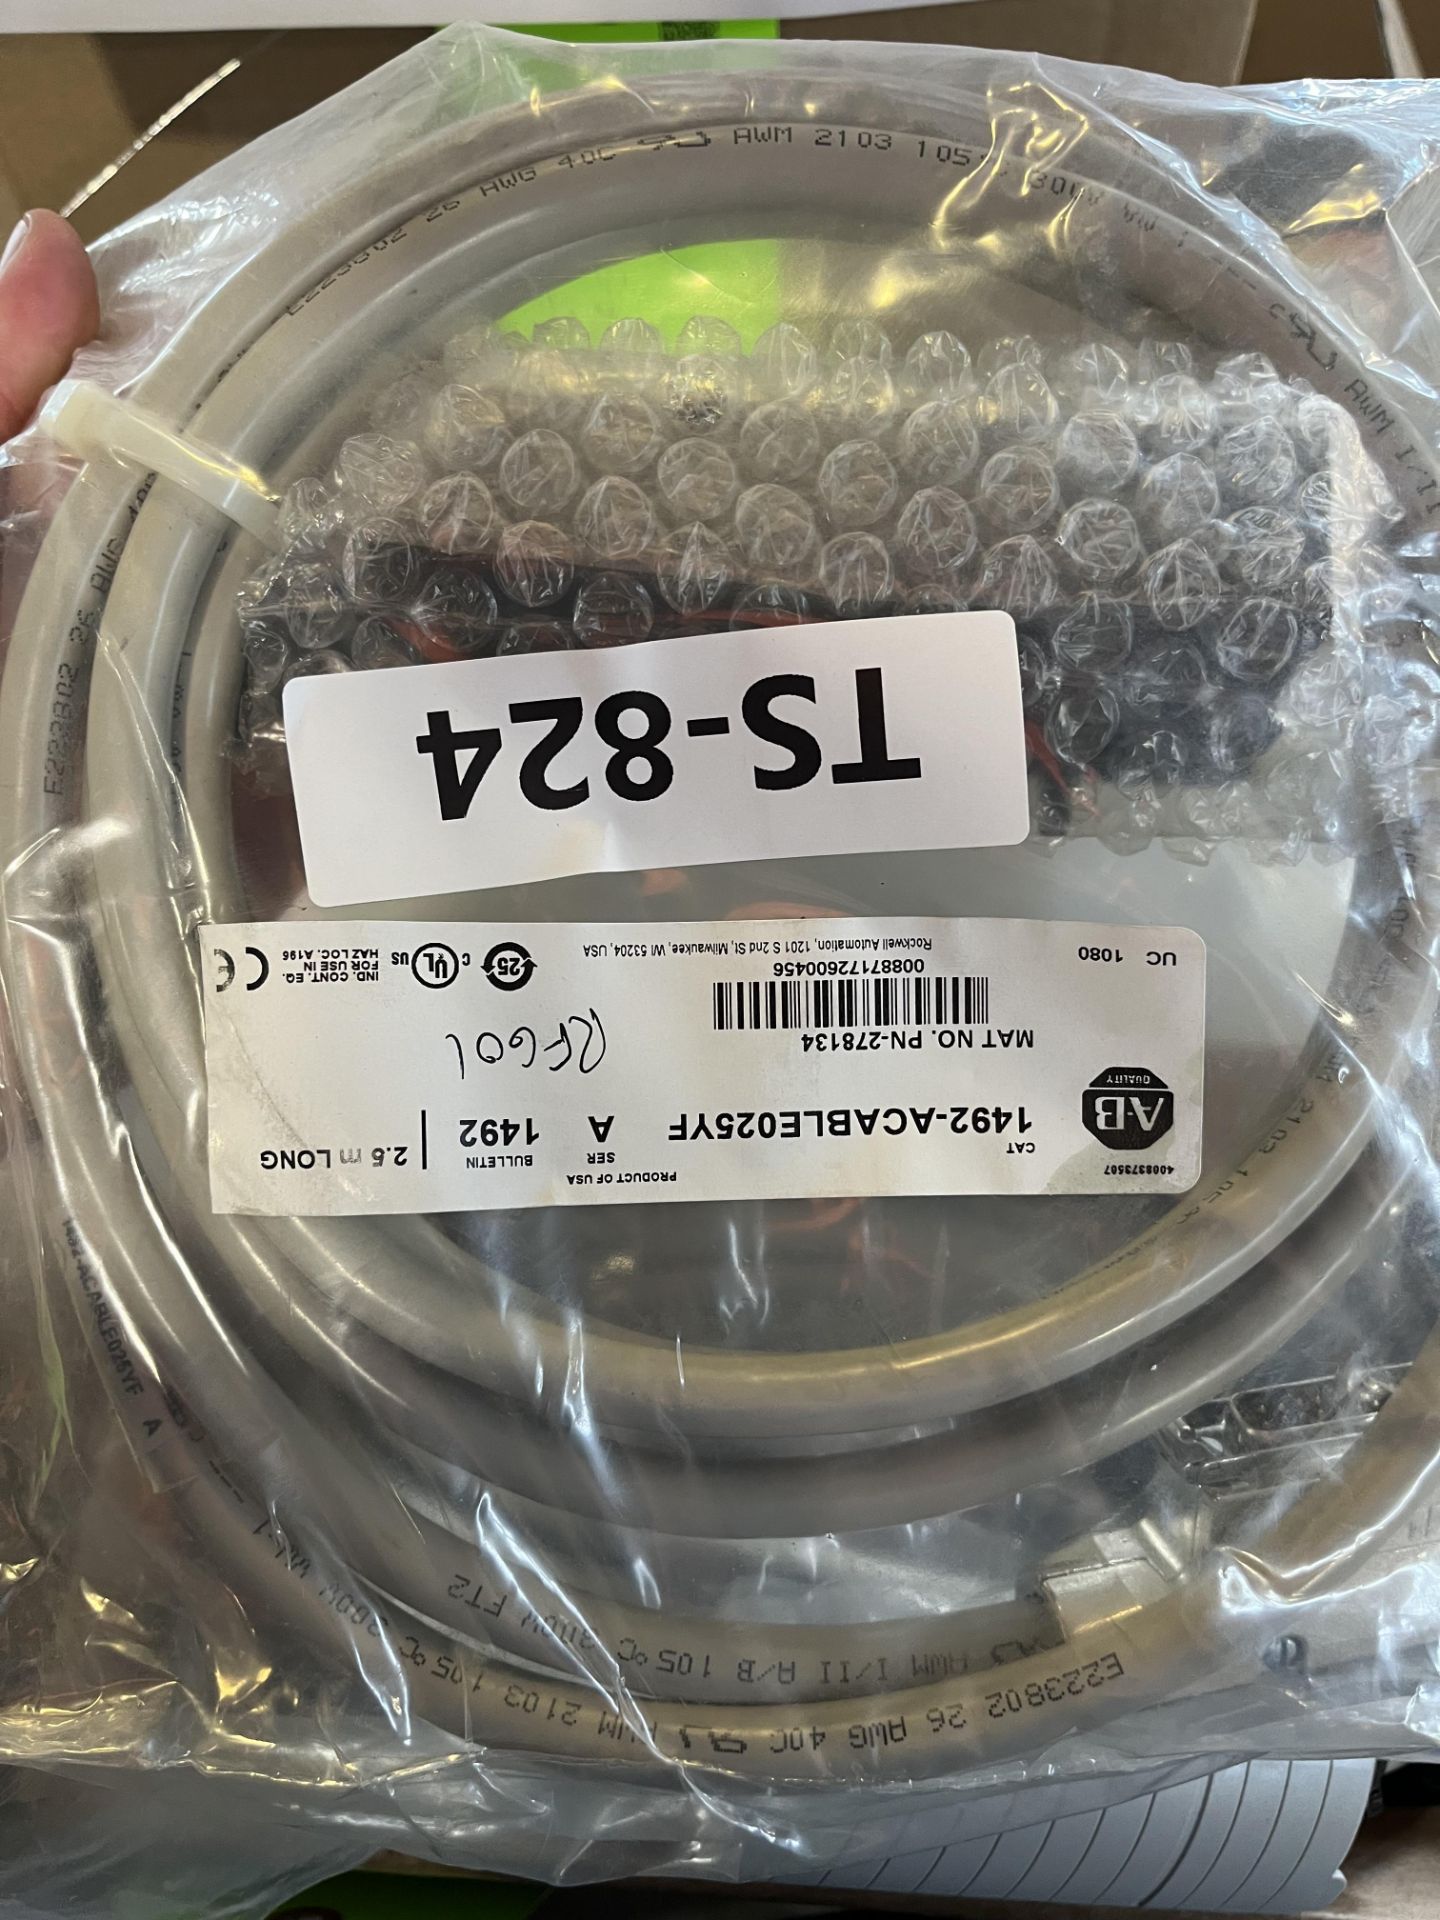 NEW (4) ALLEN-BRADLEY CABLE, 2.5M LONG, CATALOG #1492-ACABLE025YF/A - Image 2 of 4